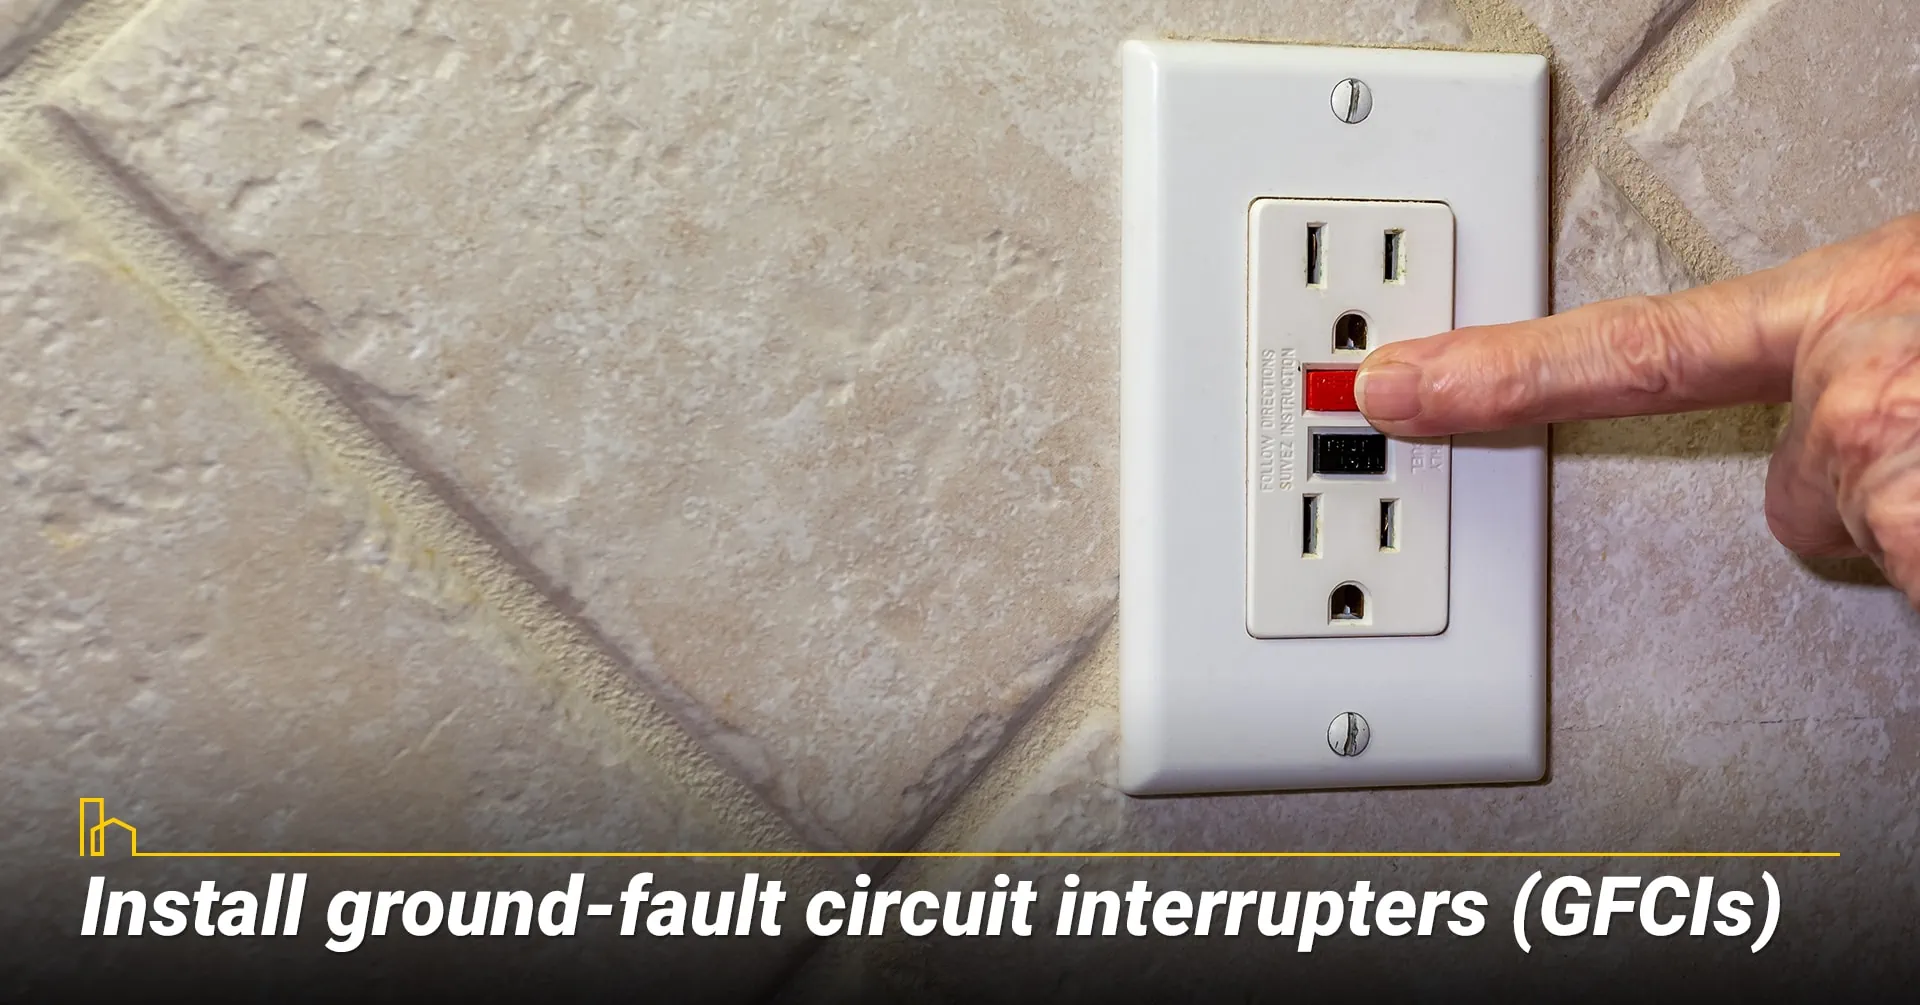 Install ground-fault circuit interrupters (GFCIs).